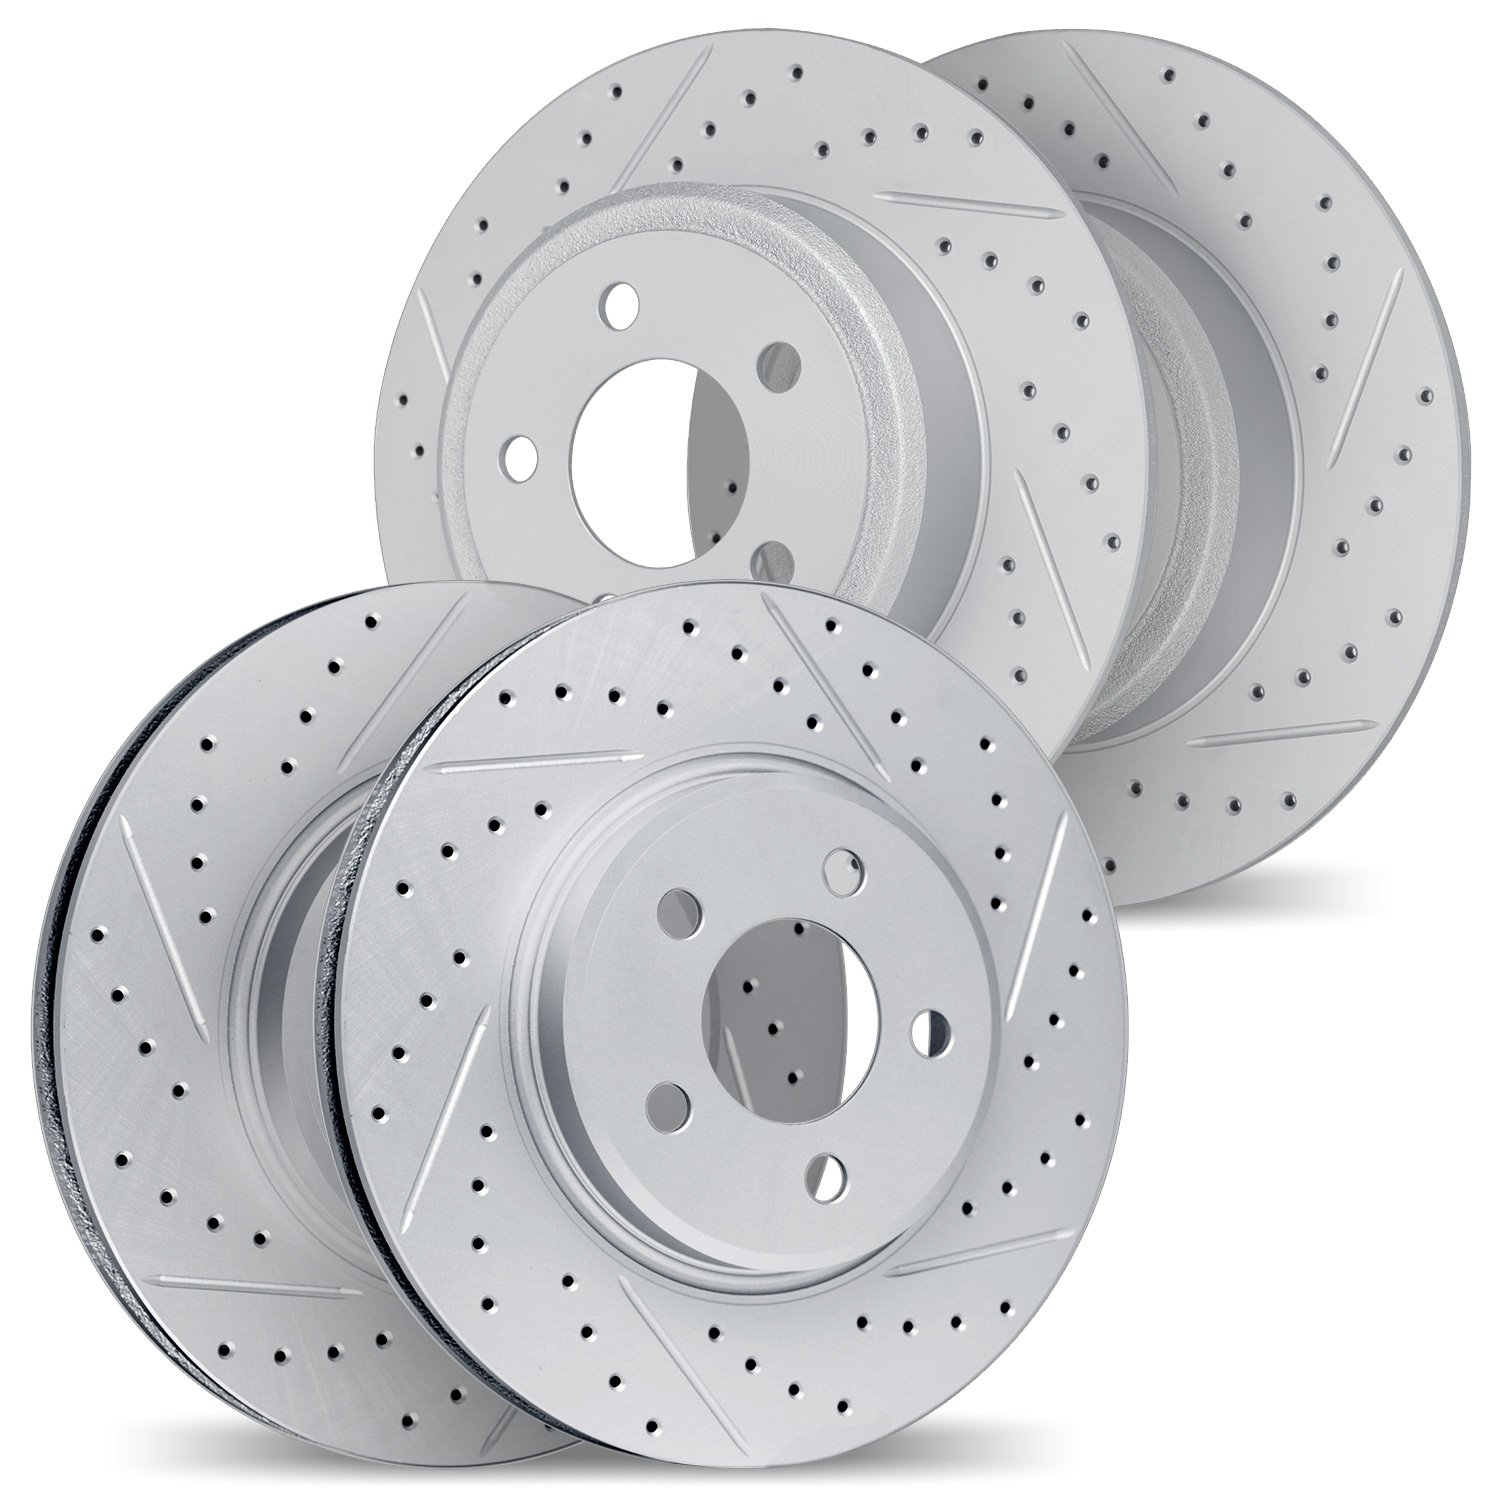 2004-03007 Geoperformance Drilled/Slotted Brake Rotors, 2018-2020 Kia/Hyundai/Genesis, Position: Front and Rear